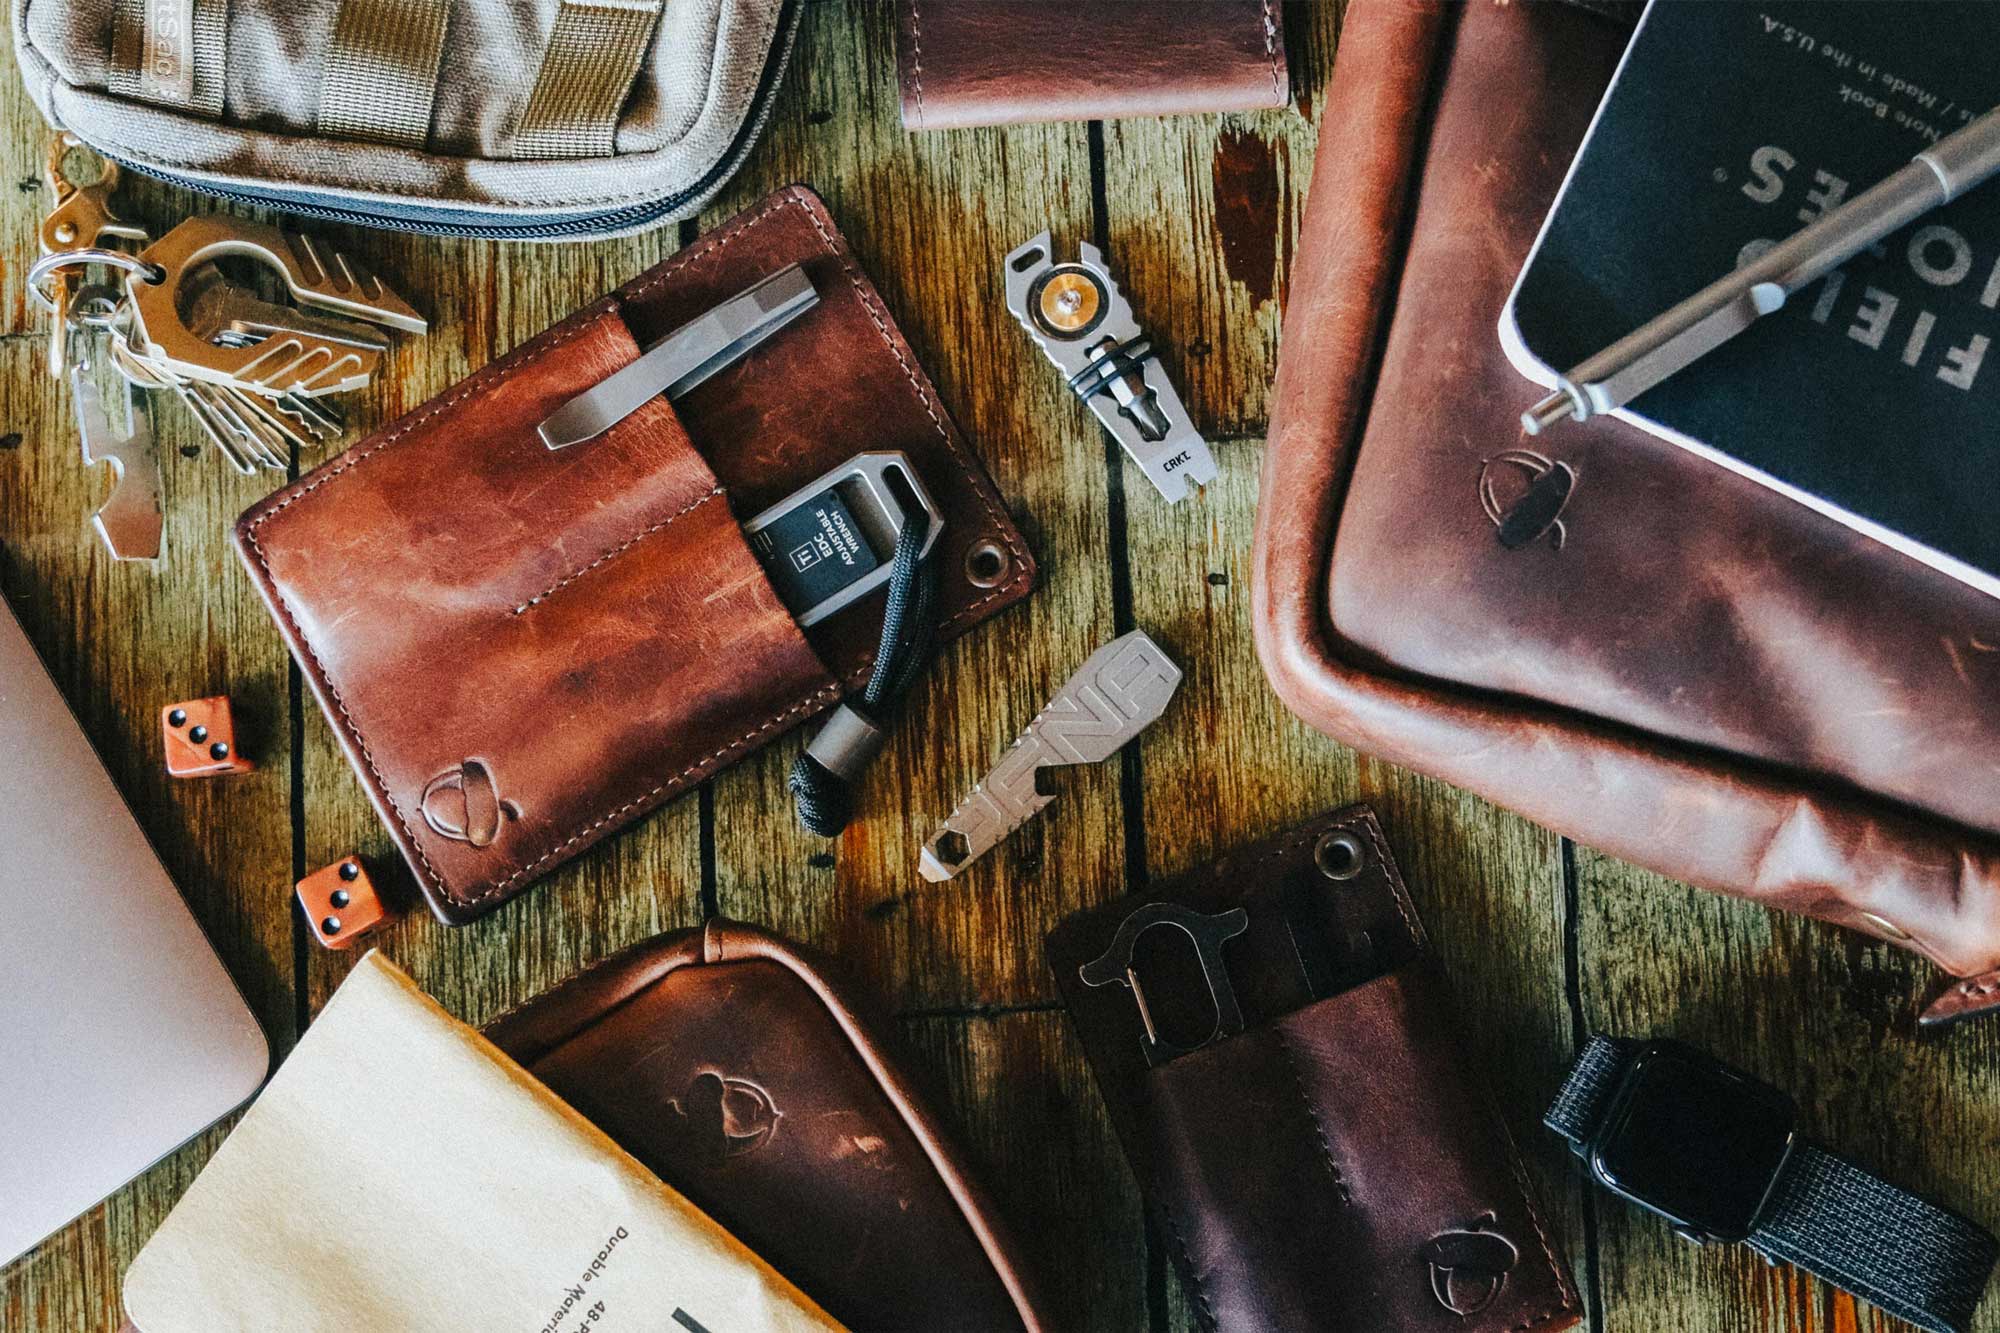 NutSac’s Guide to the Best Everyday Carry Gadgets